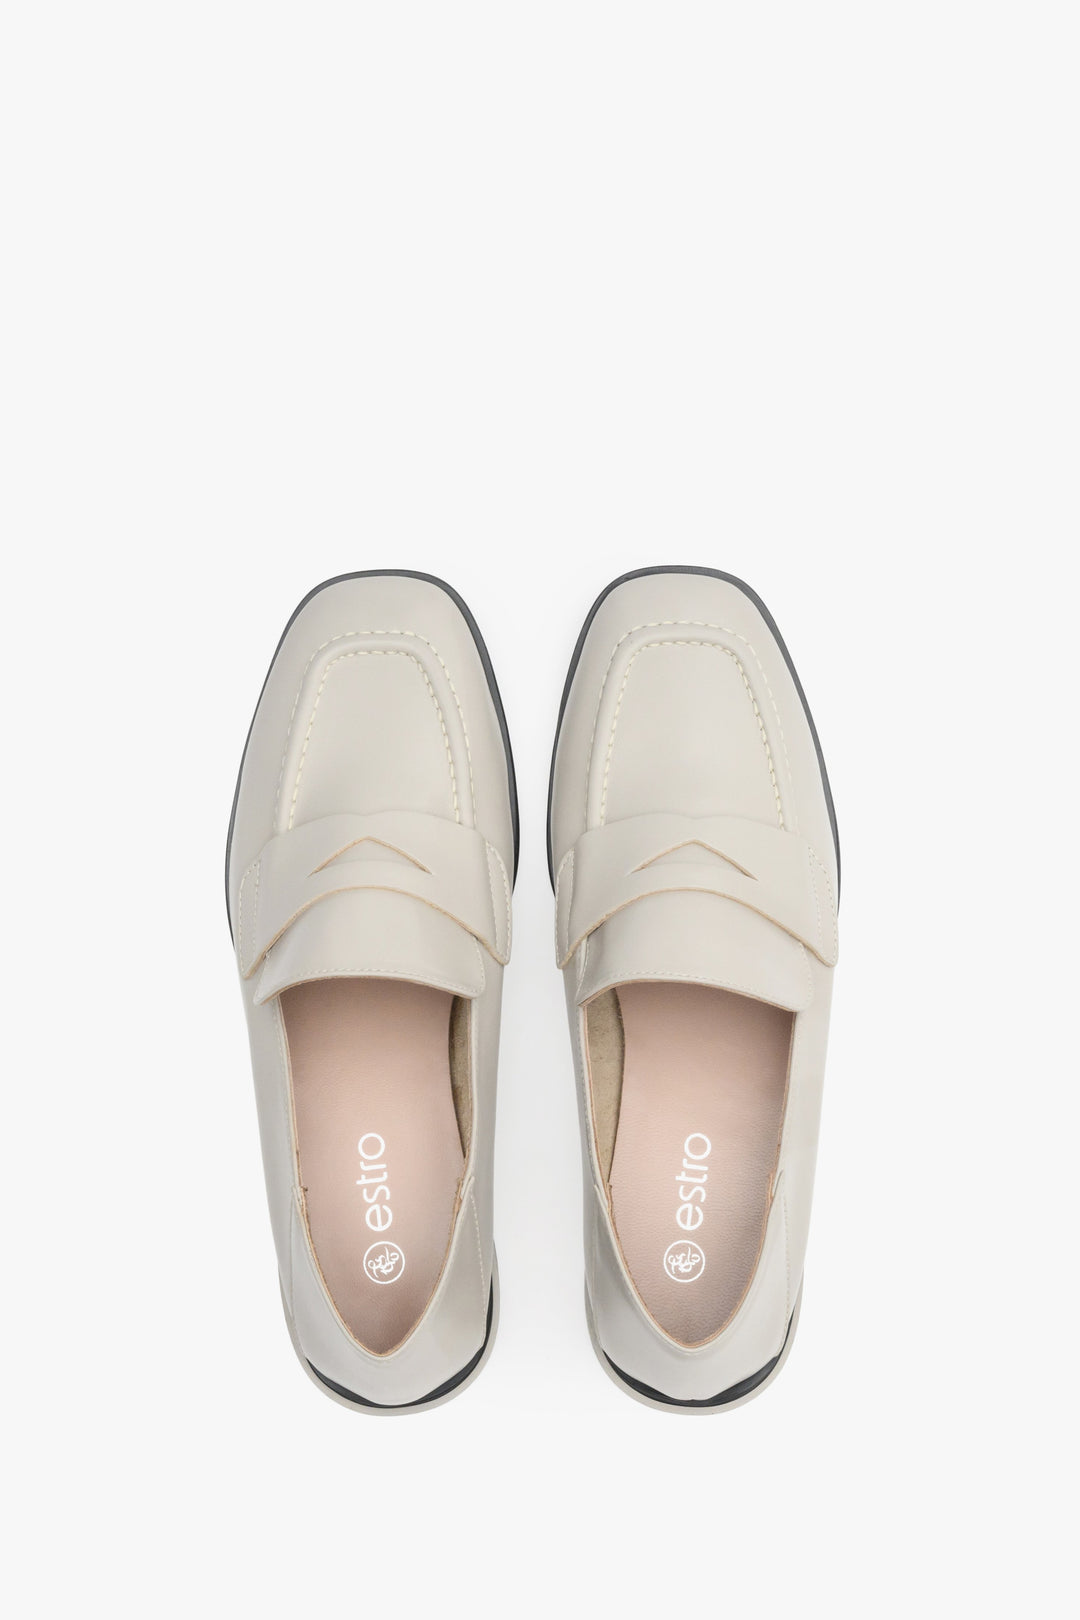 Women's beige loafers made of genuine leather by Estro - top view shoe presentation.